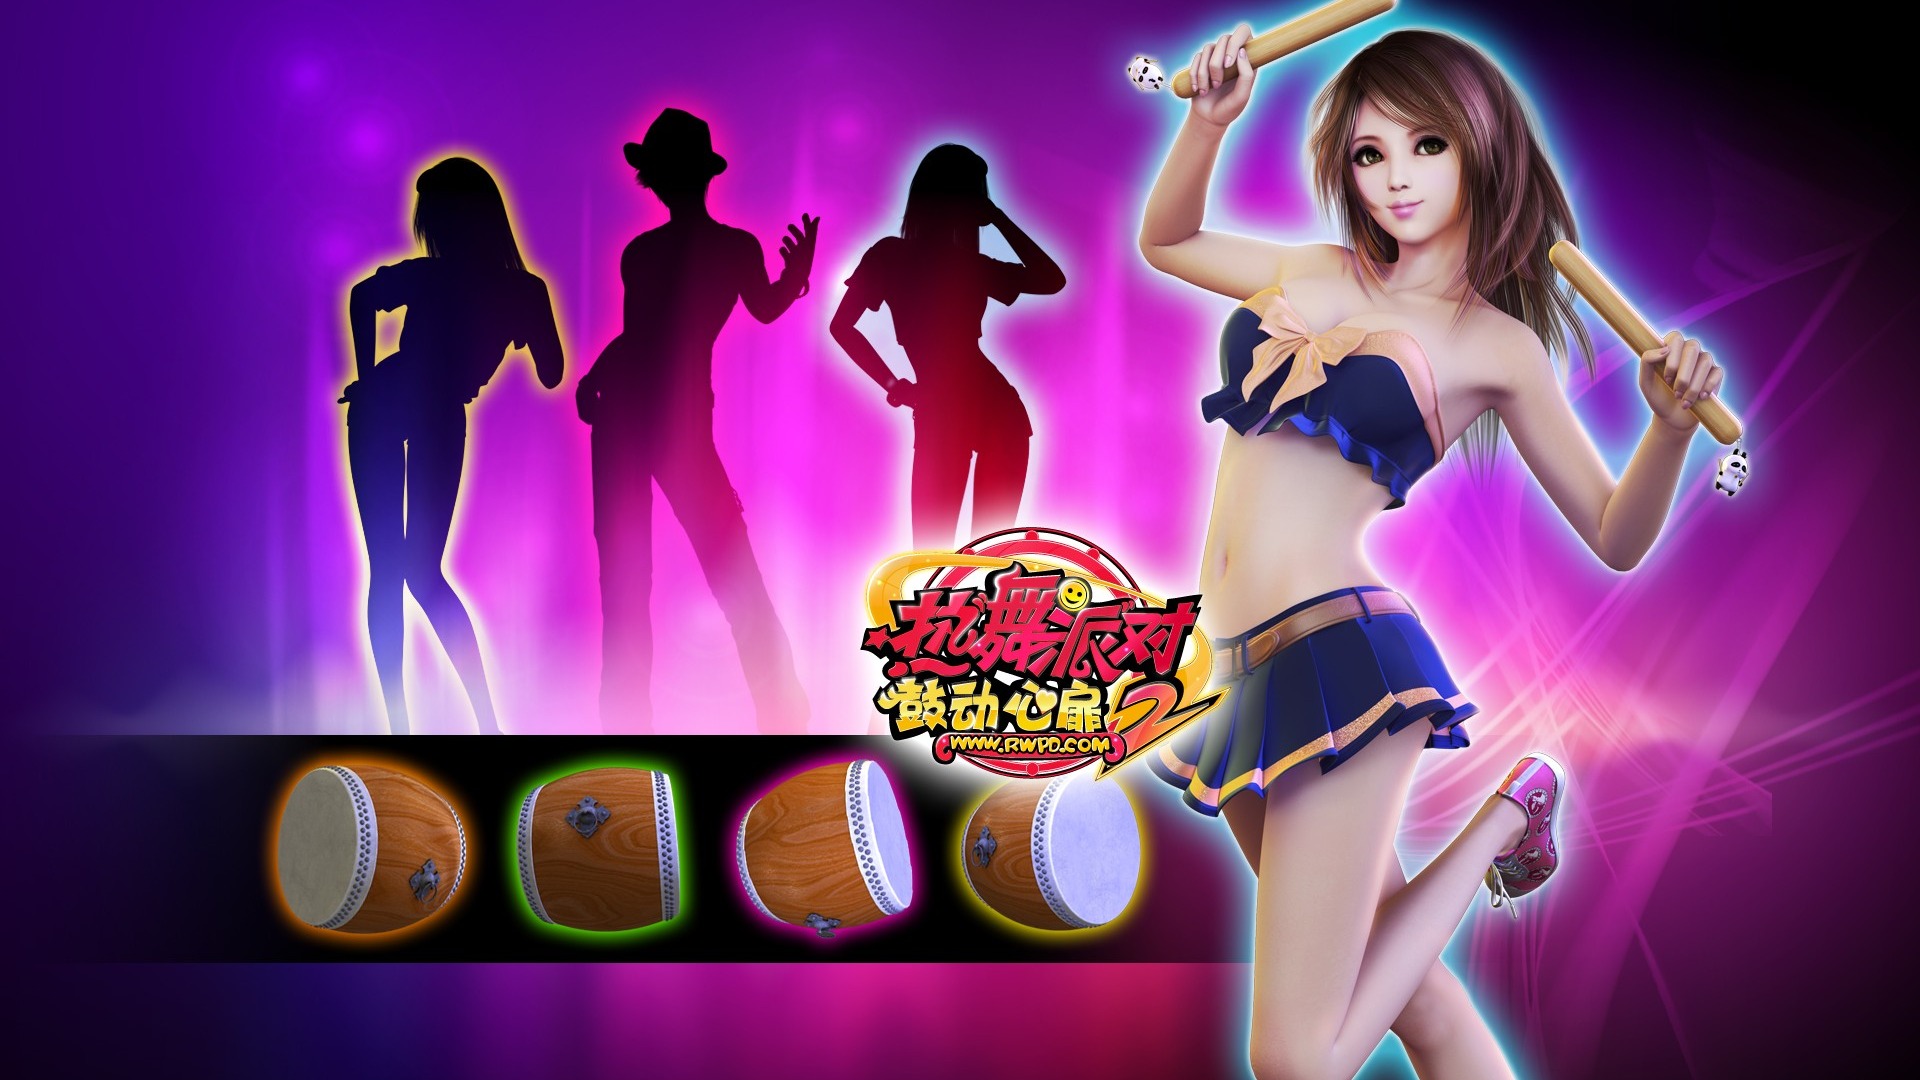 Online game Hot Dance Party II official wallpapers #15 - 1920x1080